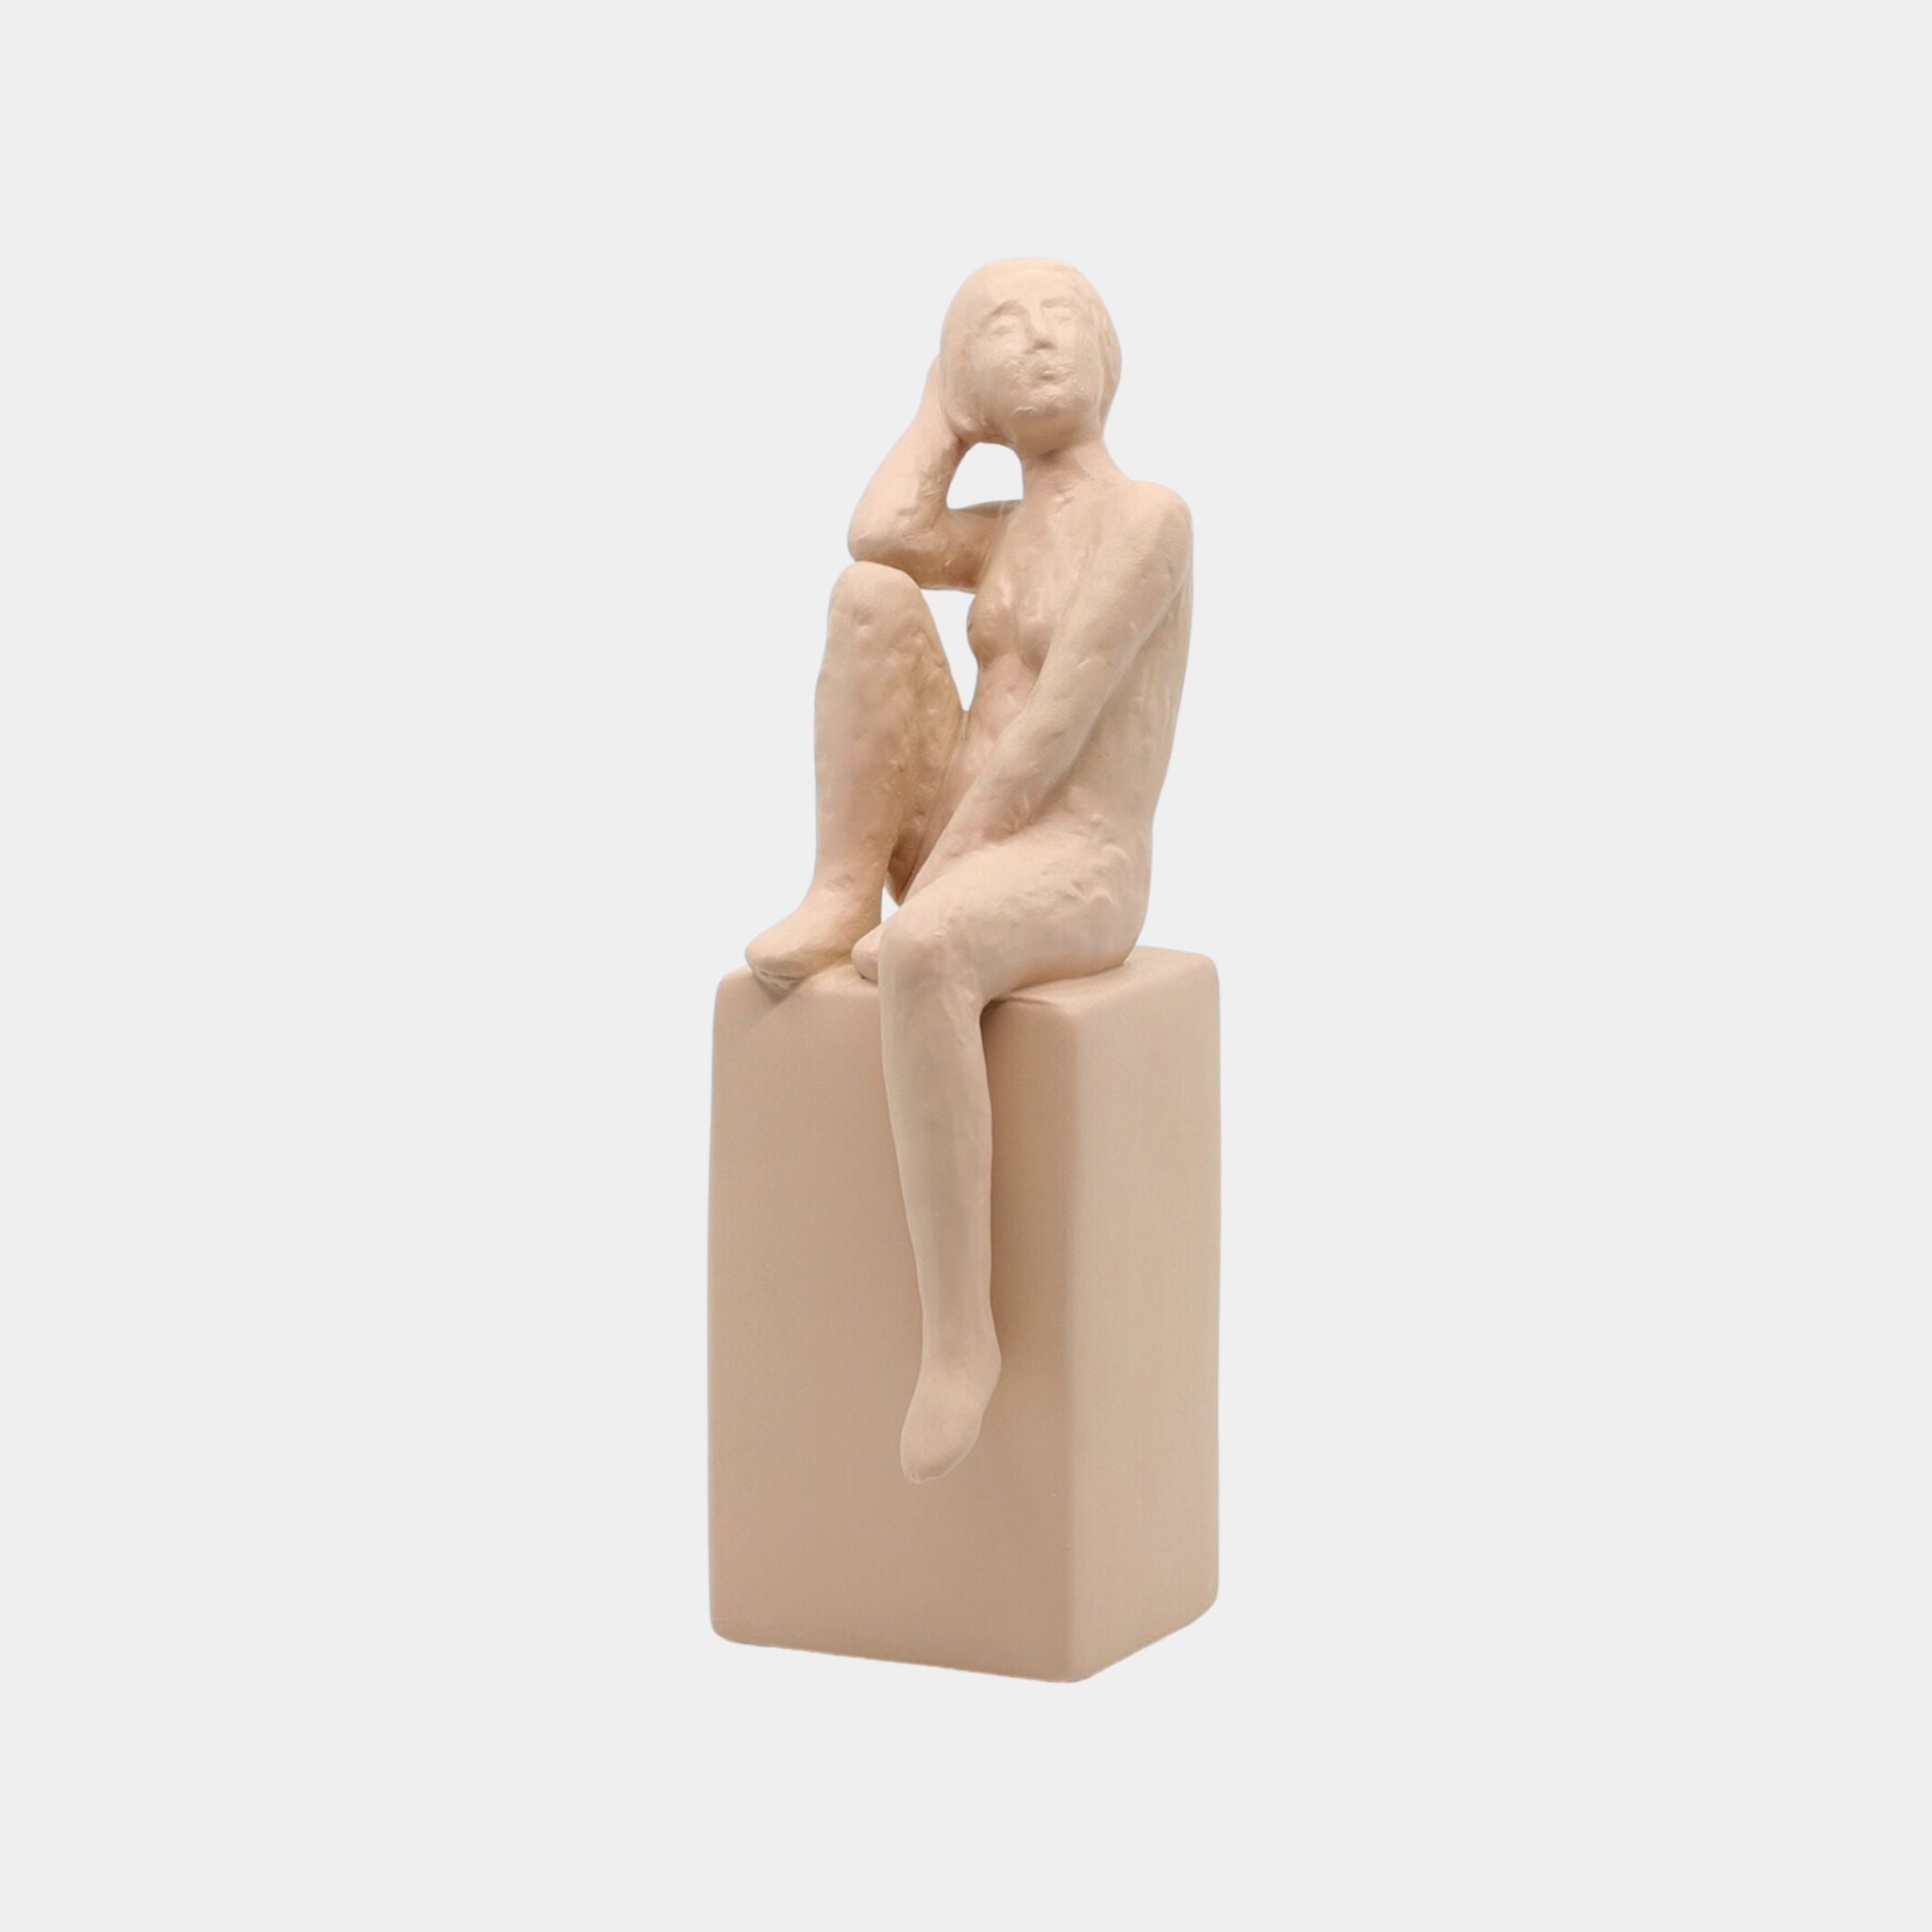 Ceramic Sculptures | Playful People II - The Feelter